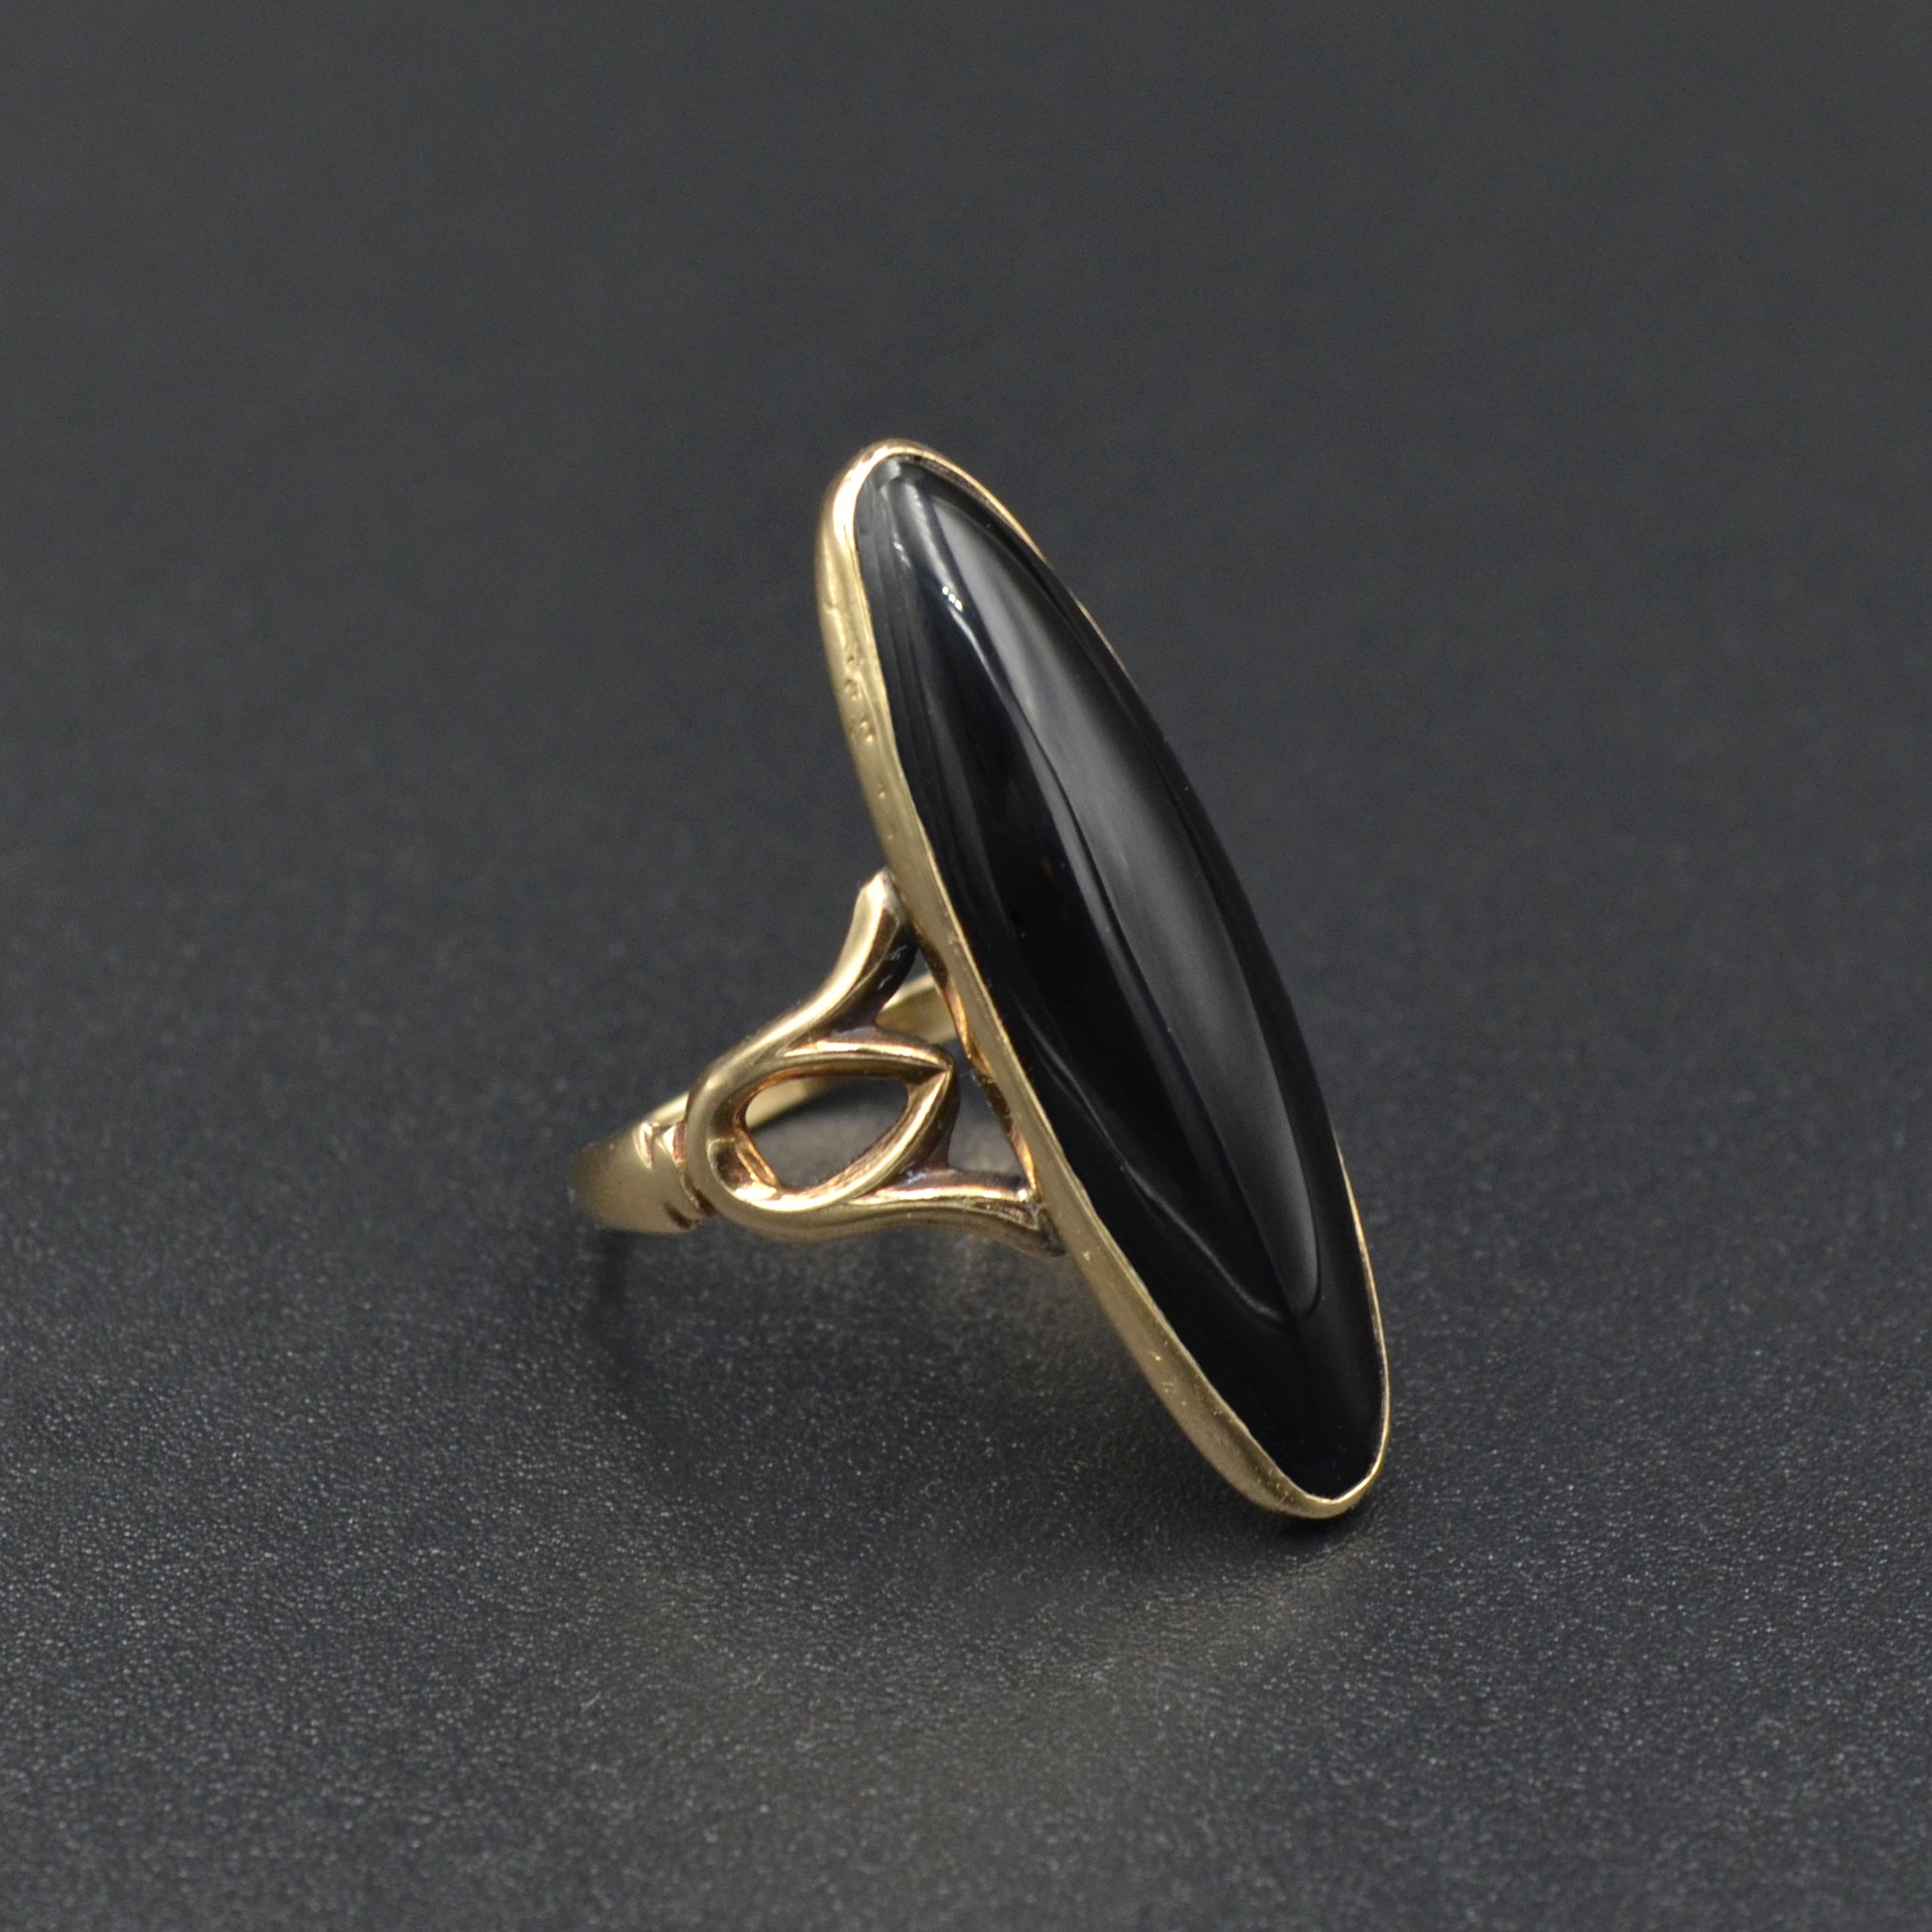 Vintage Egyptian Revival Black Onyx and 10k Gold Ring